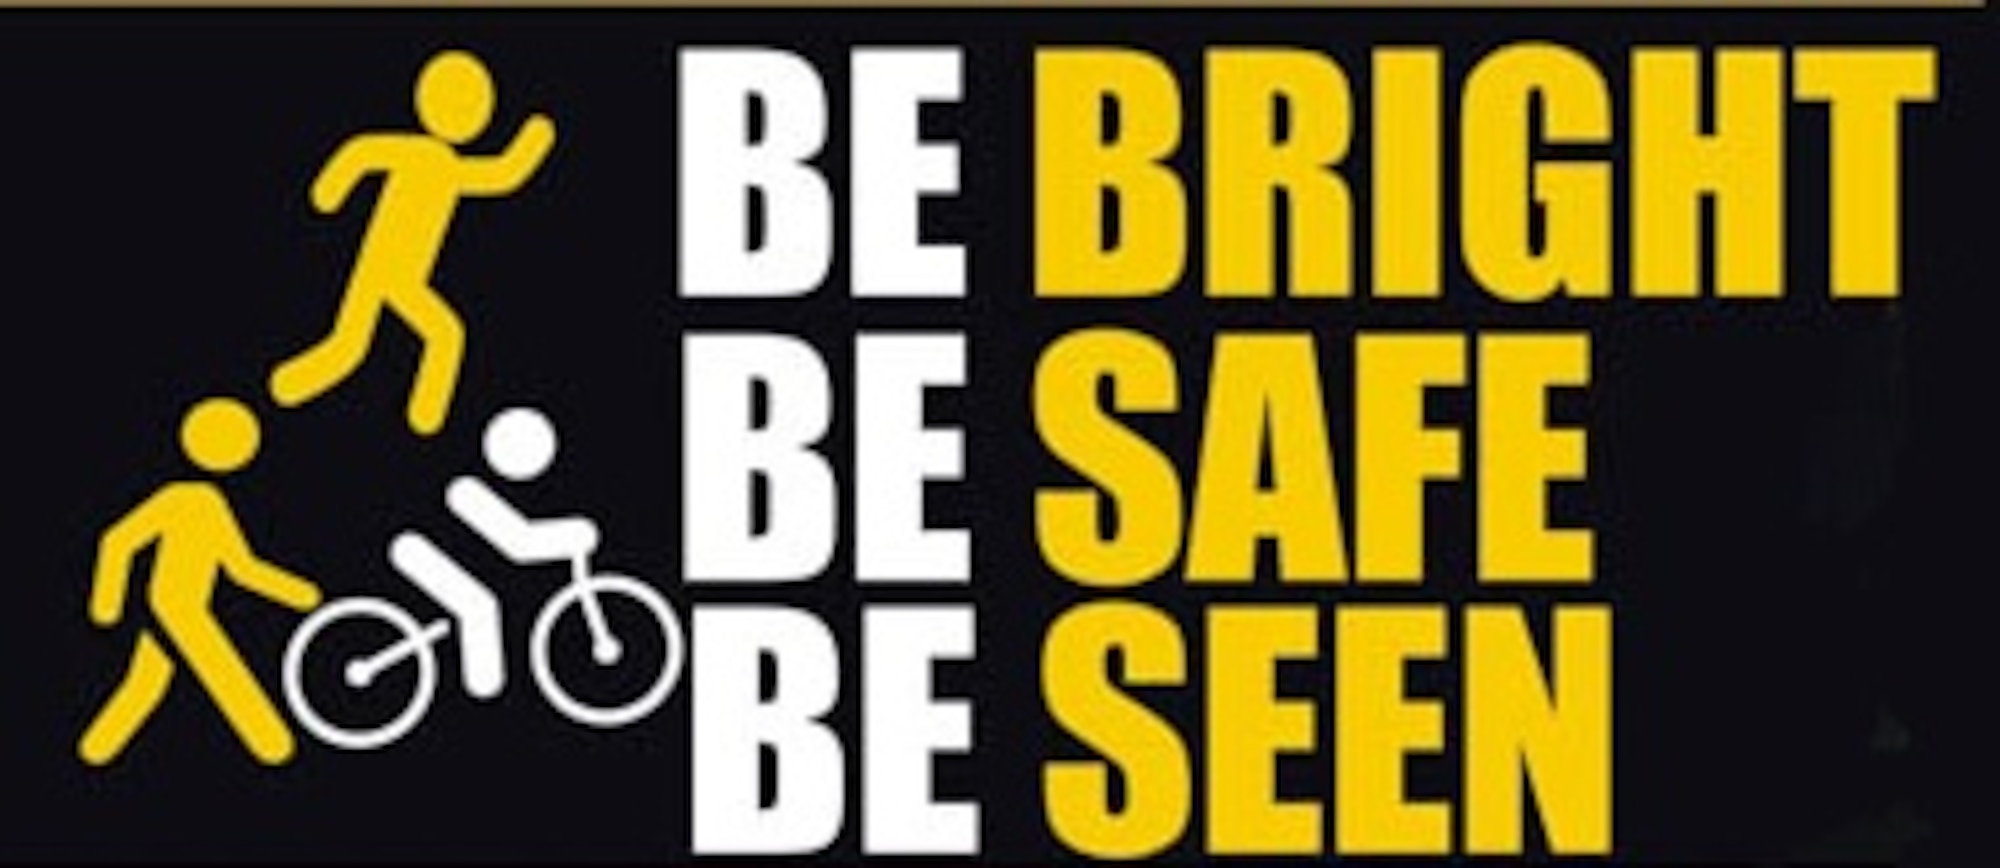 "Be Bright, Be Safe, Be Seen" is aimed at all road users; pedestrians, cyclists’ runners and drivers of all types of vehicles, to highlight the importance of being extra-cautious throughout the year in times of low visibility and darkness.